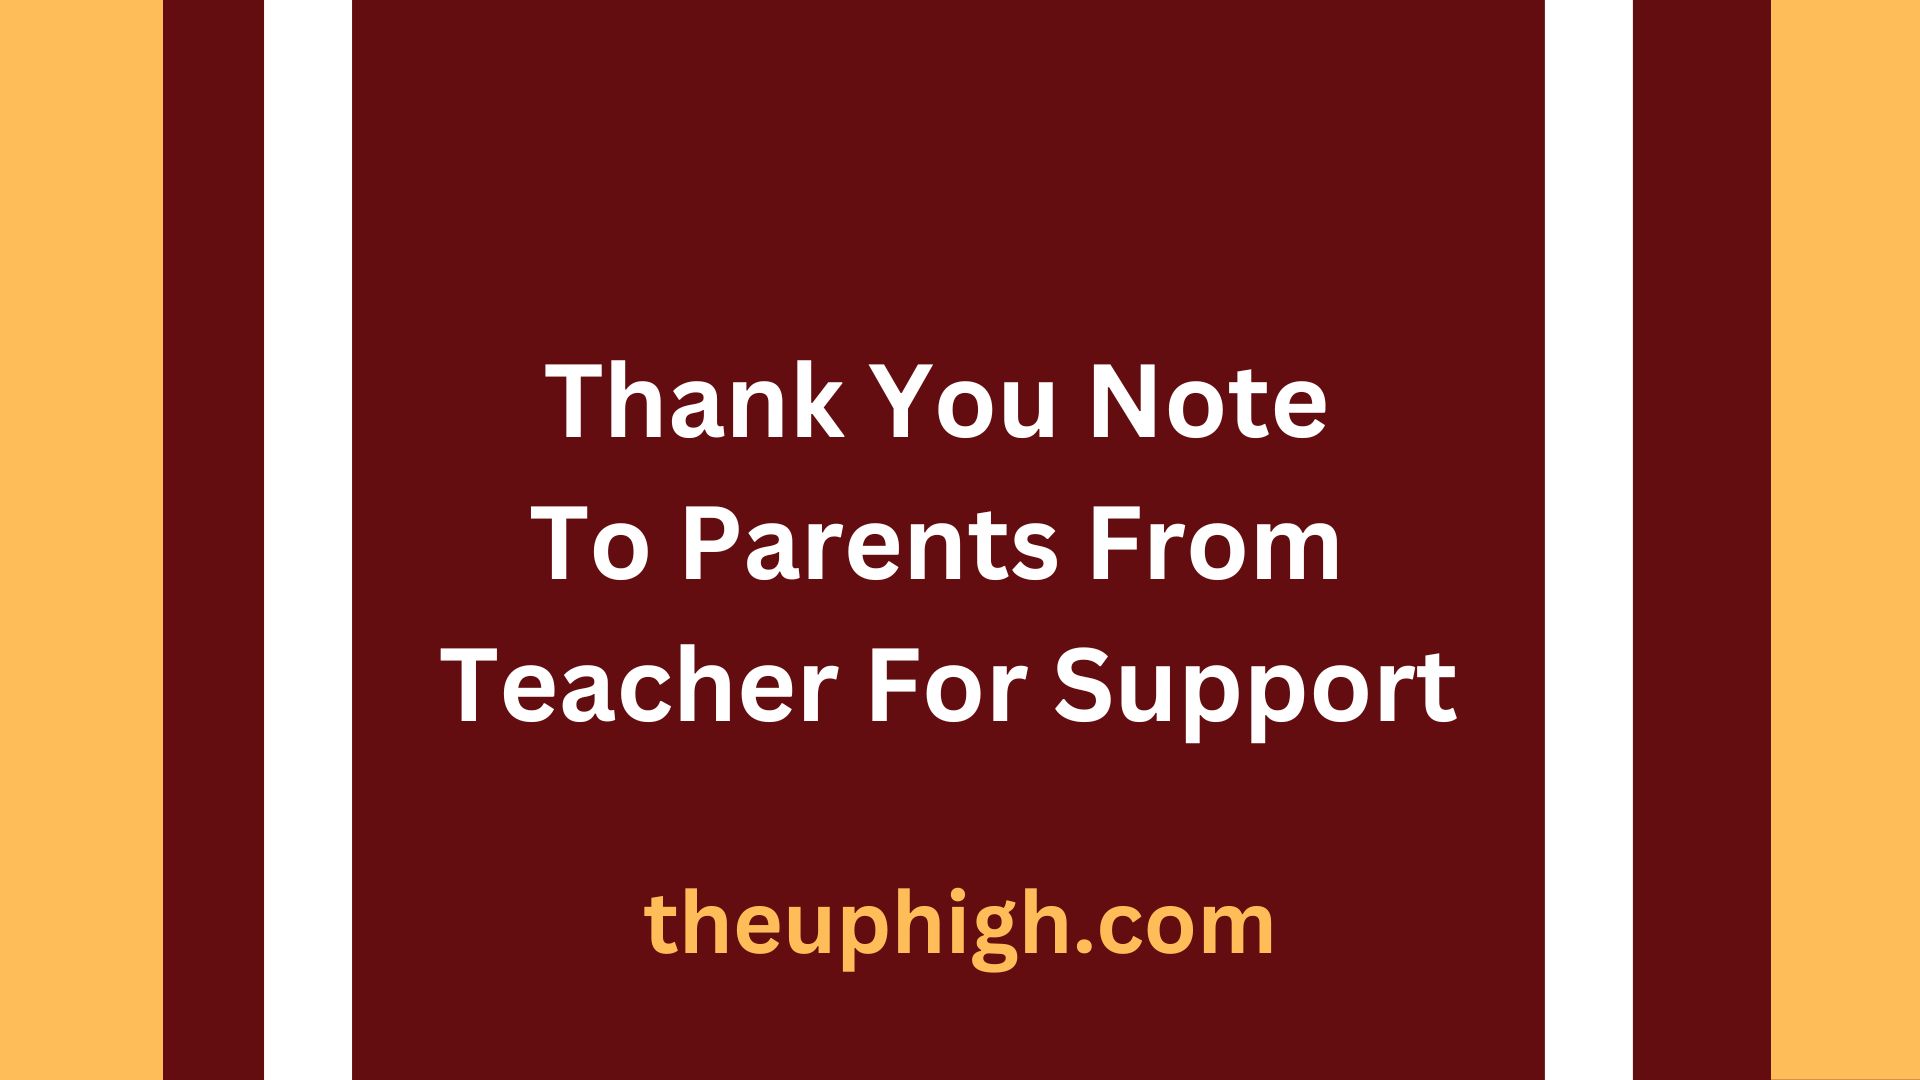 Thank You Note To Parents From Teacher For Support